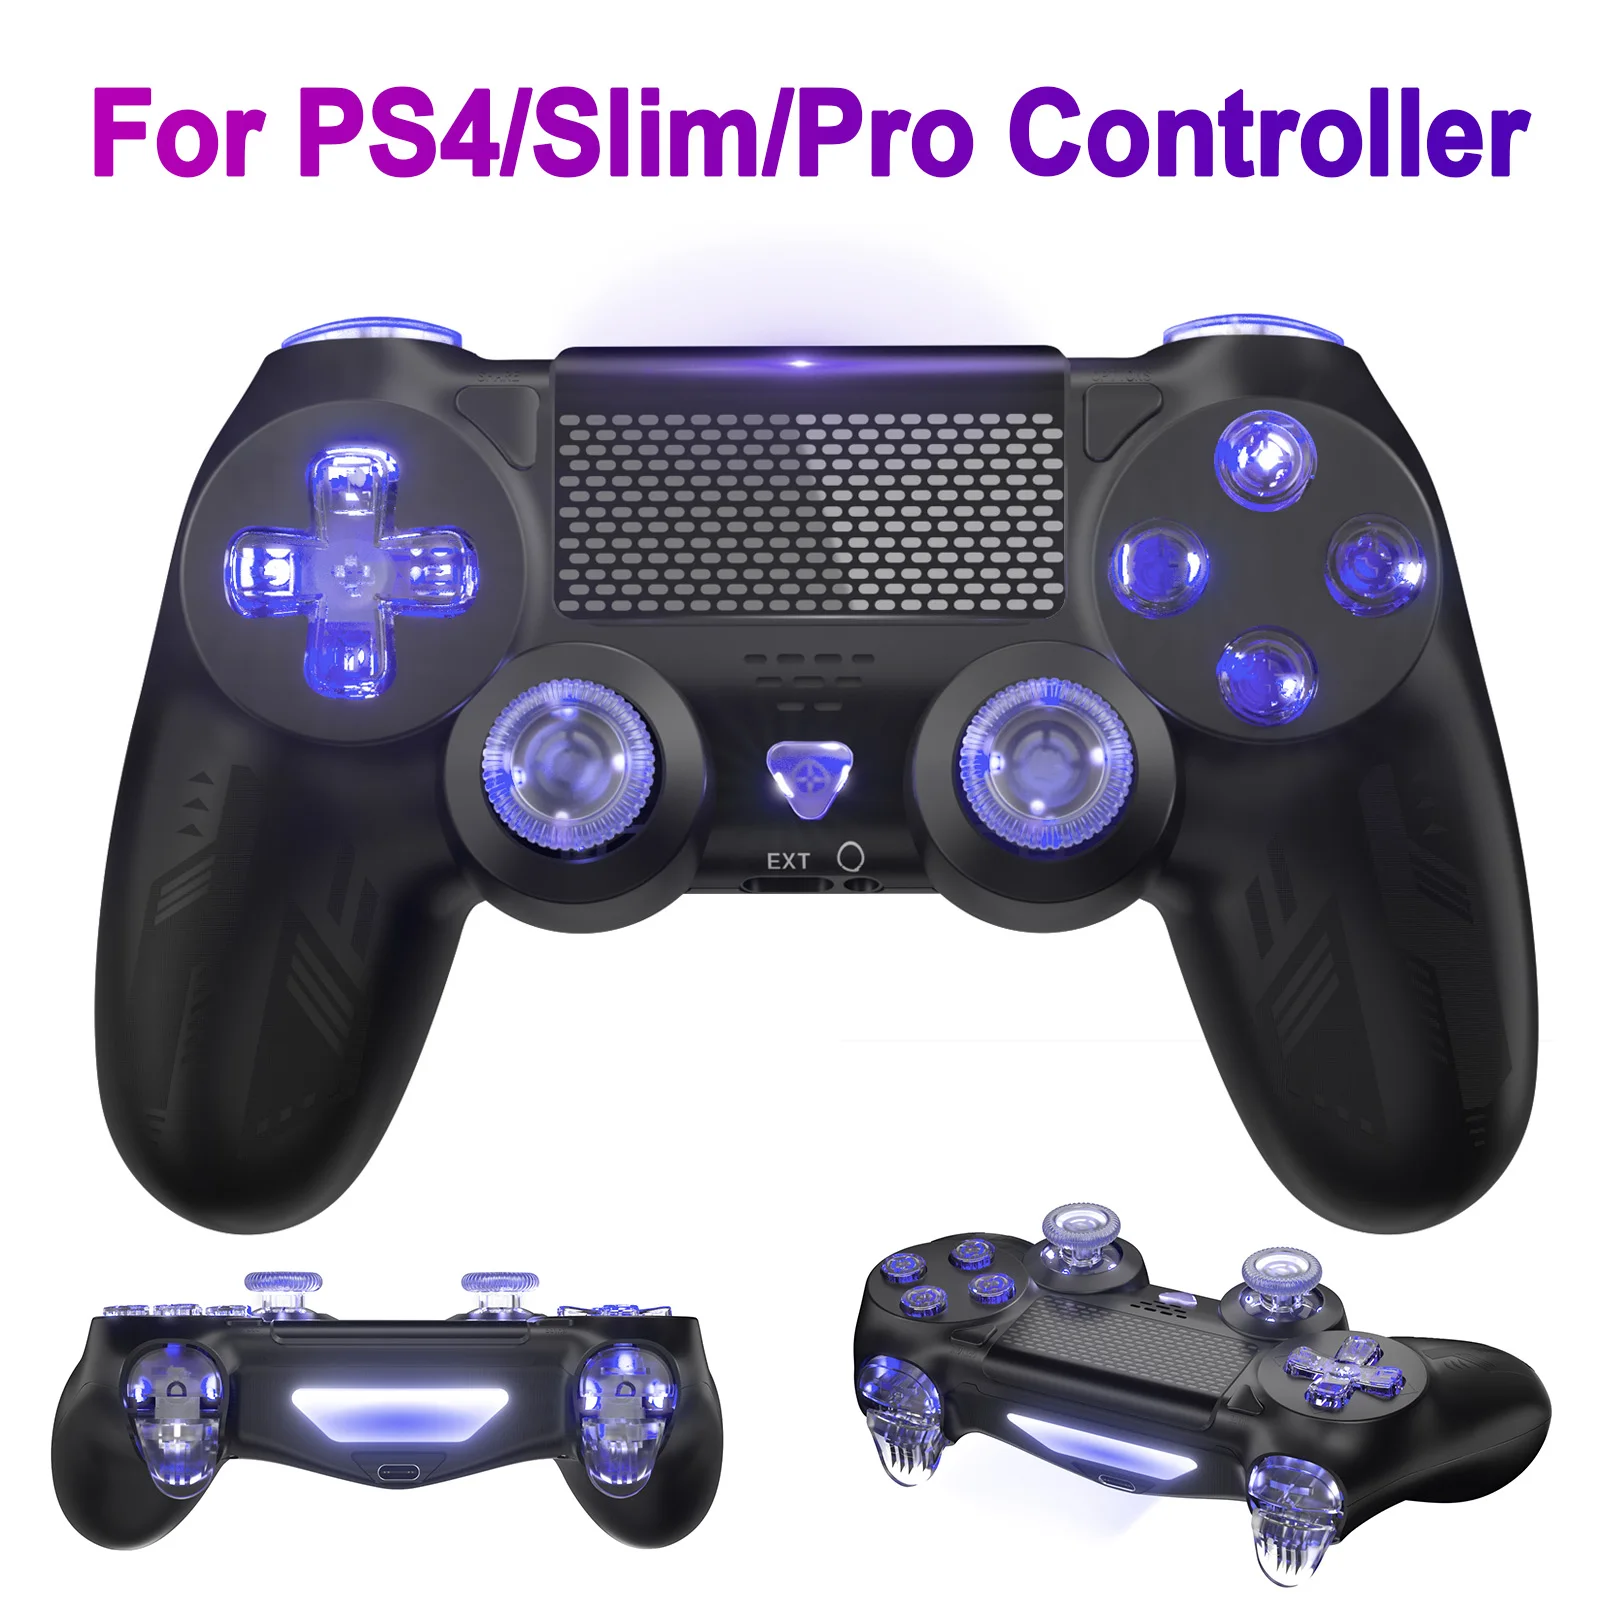 

For PS4/Slim/Pro Controller,light button Wireless Game controle Compatible,Remote Gamepad Support/Dual Vibration/Turbo/6-Axis